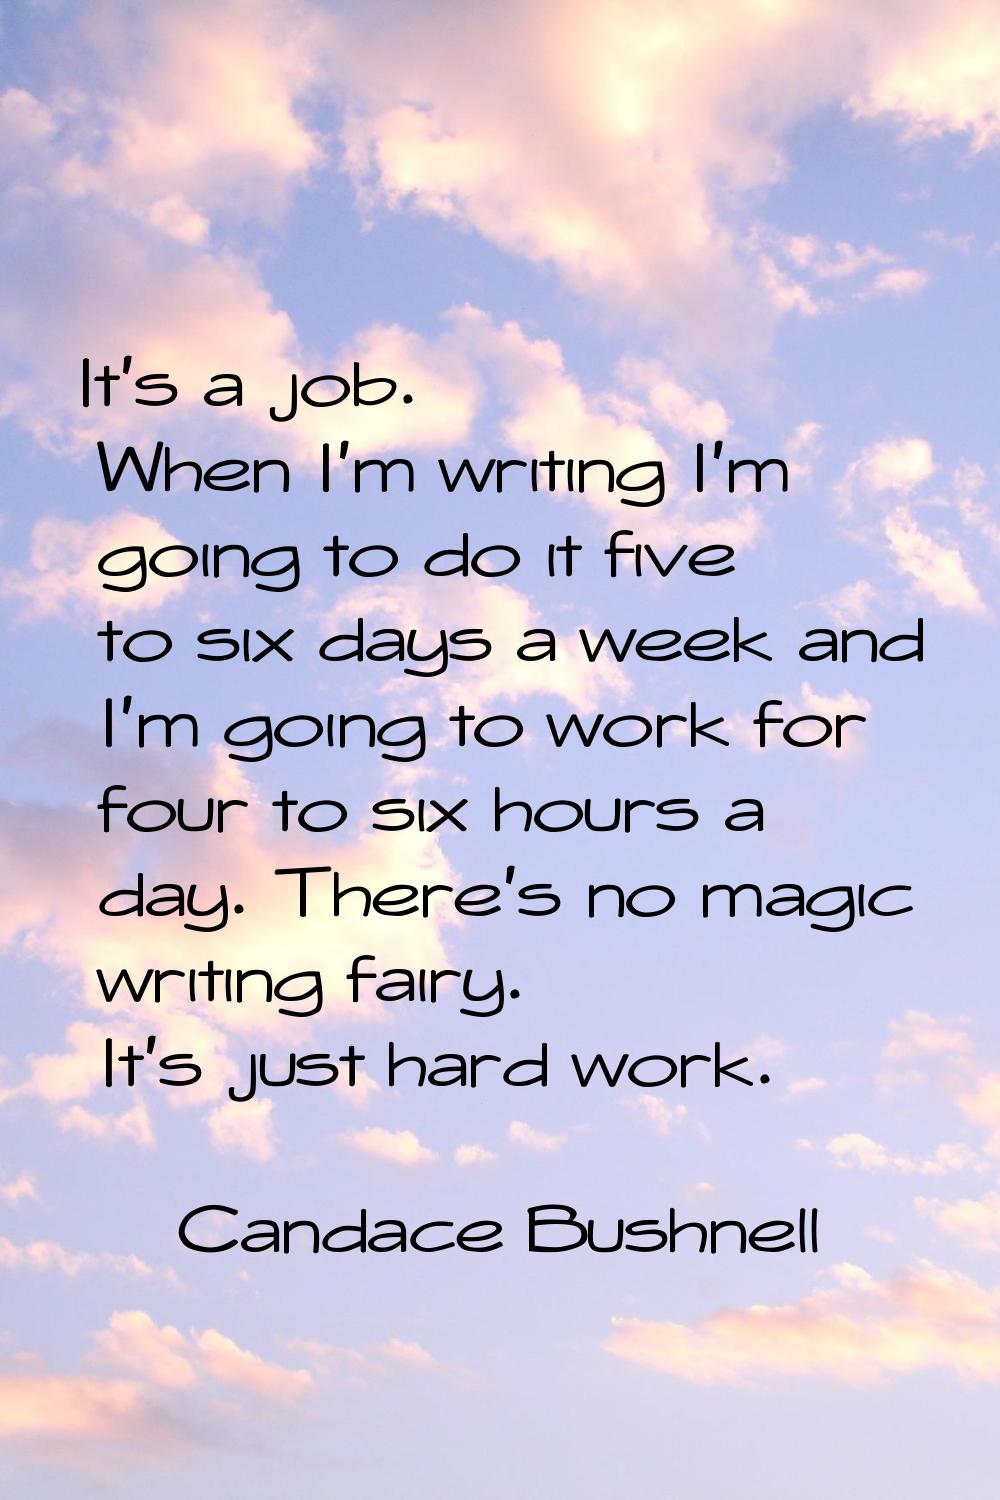 It's a job. When I'm writing I'm going to do it five to six days a week and I'm going to work for f